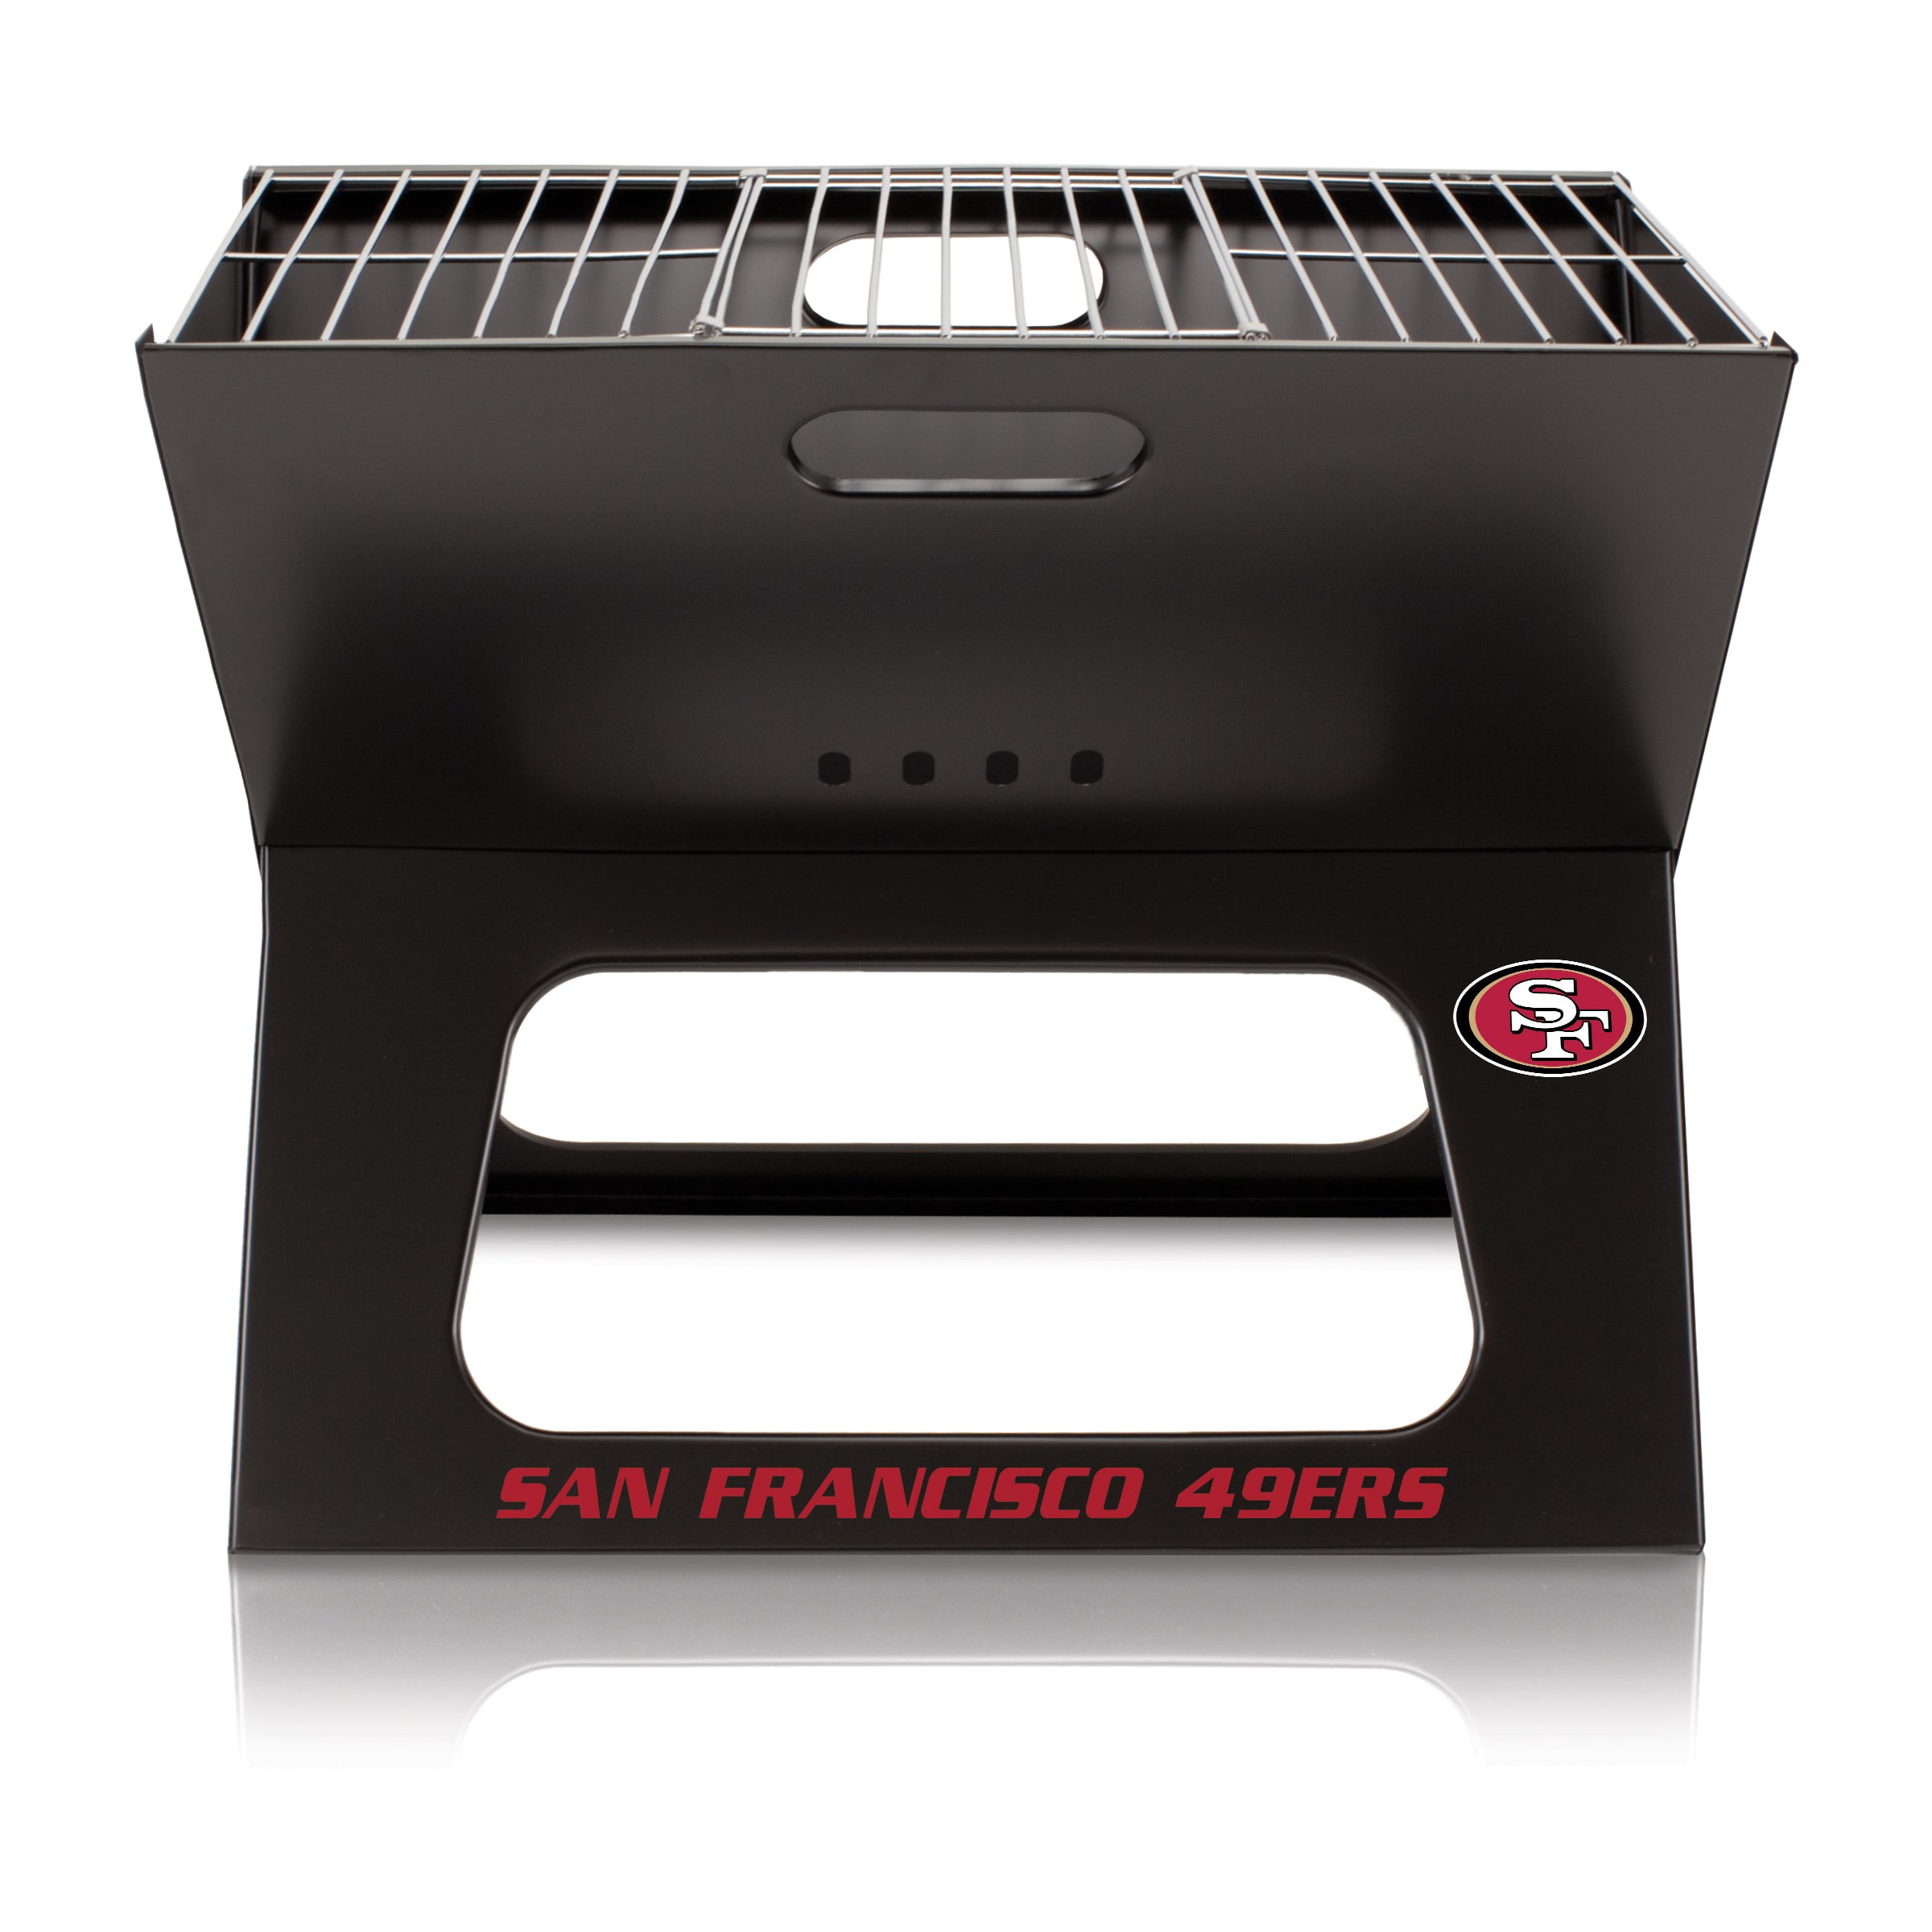 San Francisco 49ers - X-Grill Portable Charcoal BBQ Grill